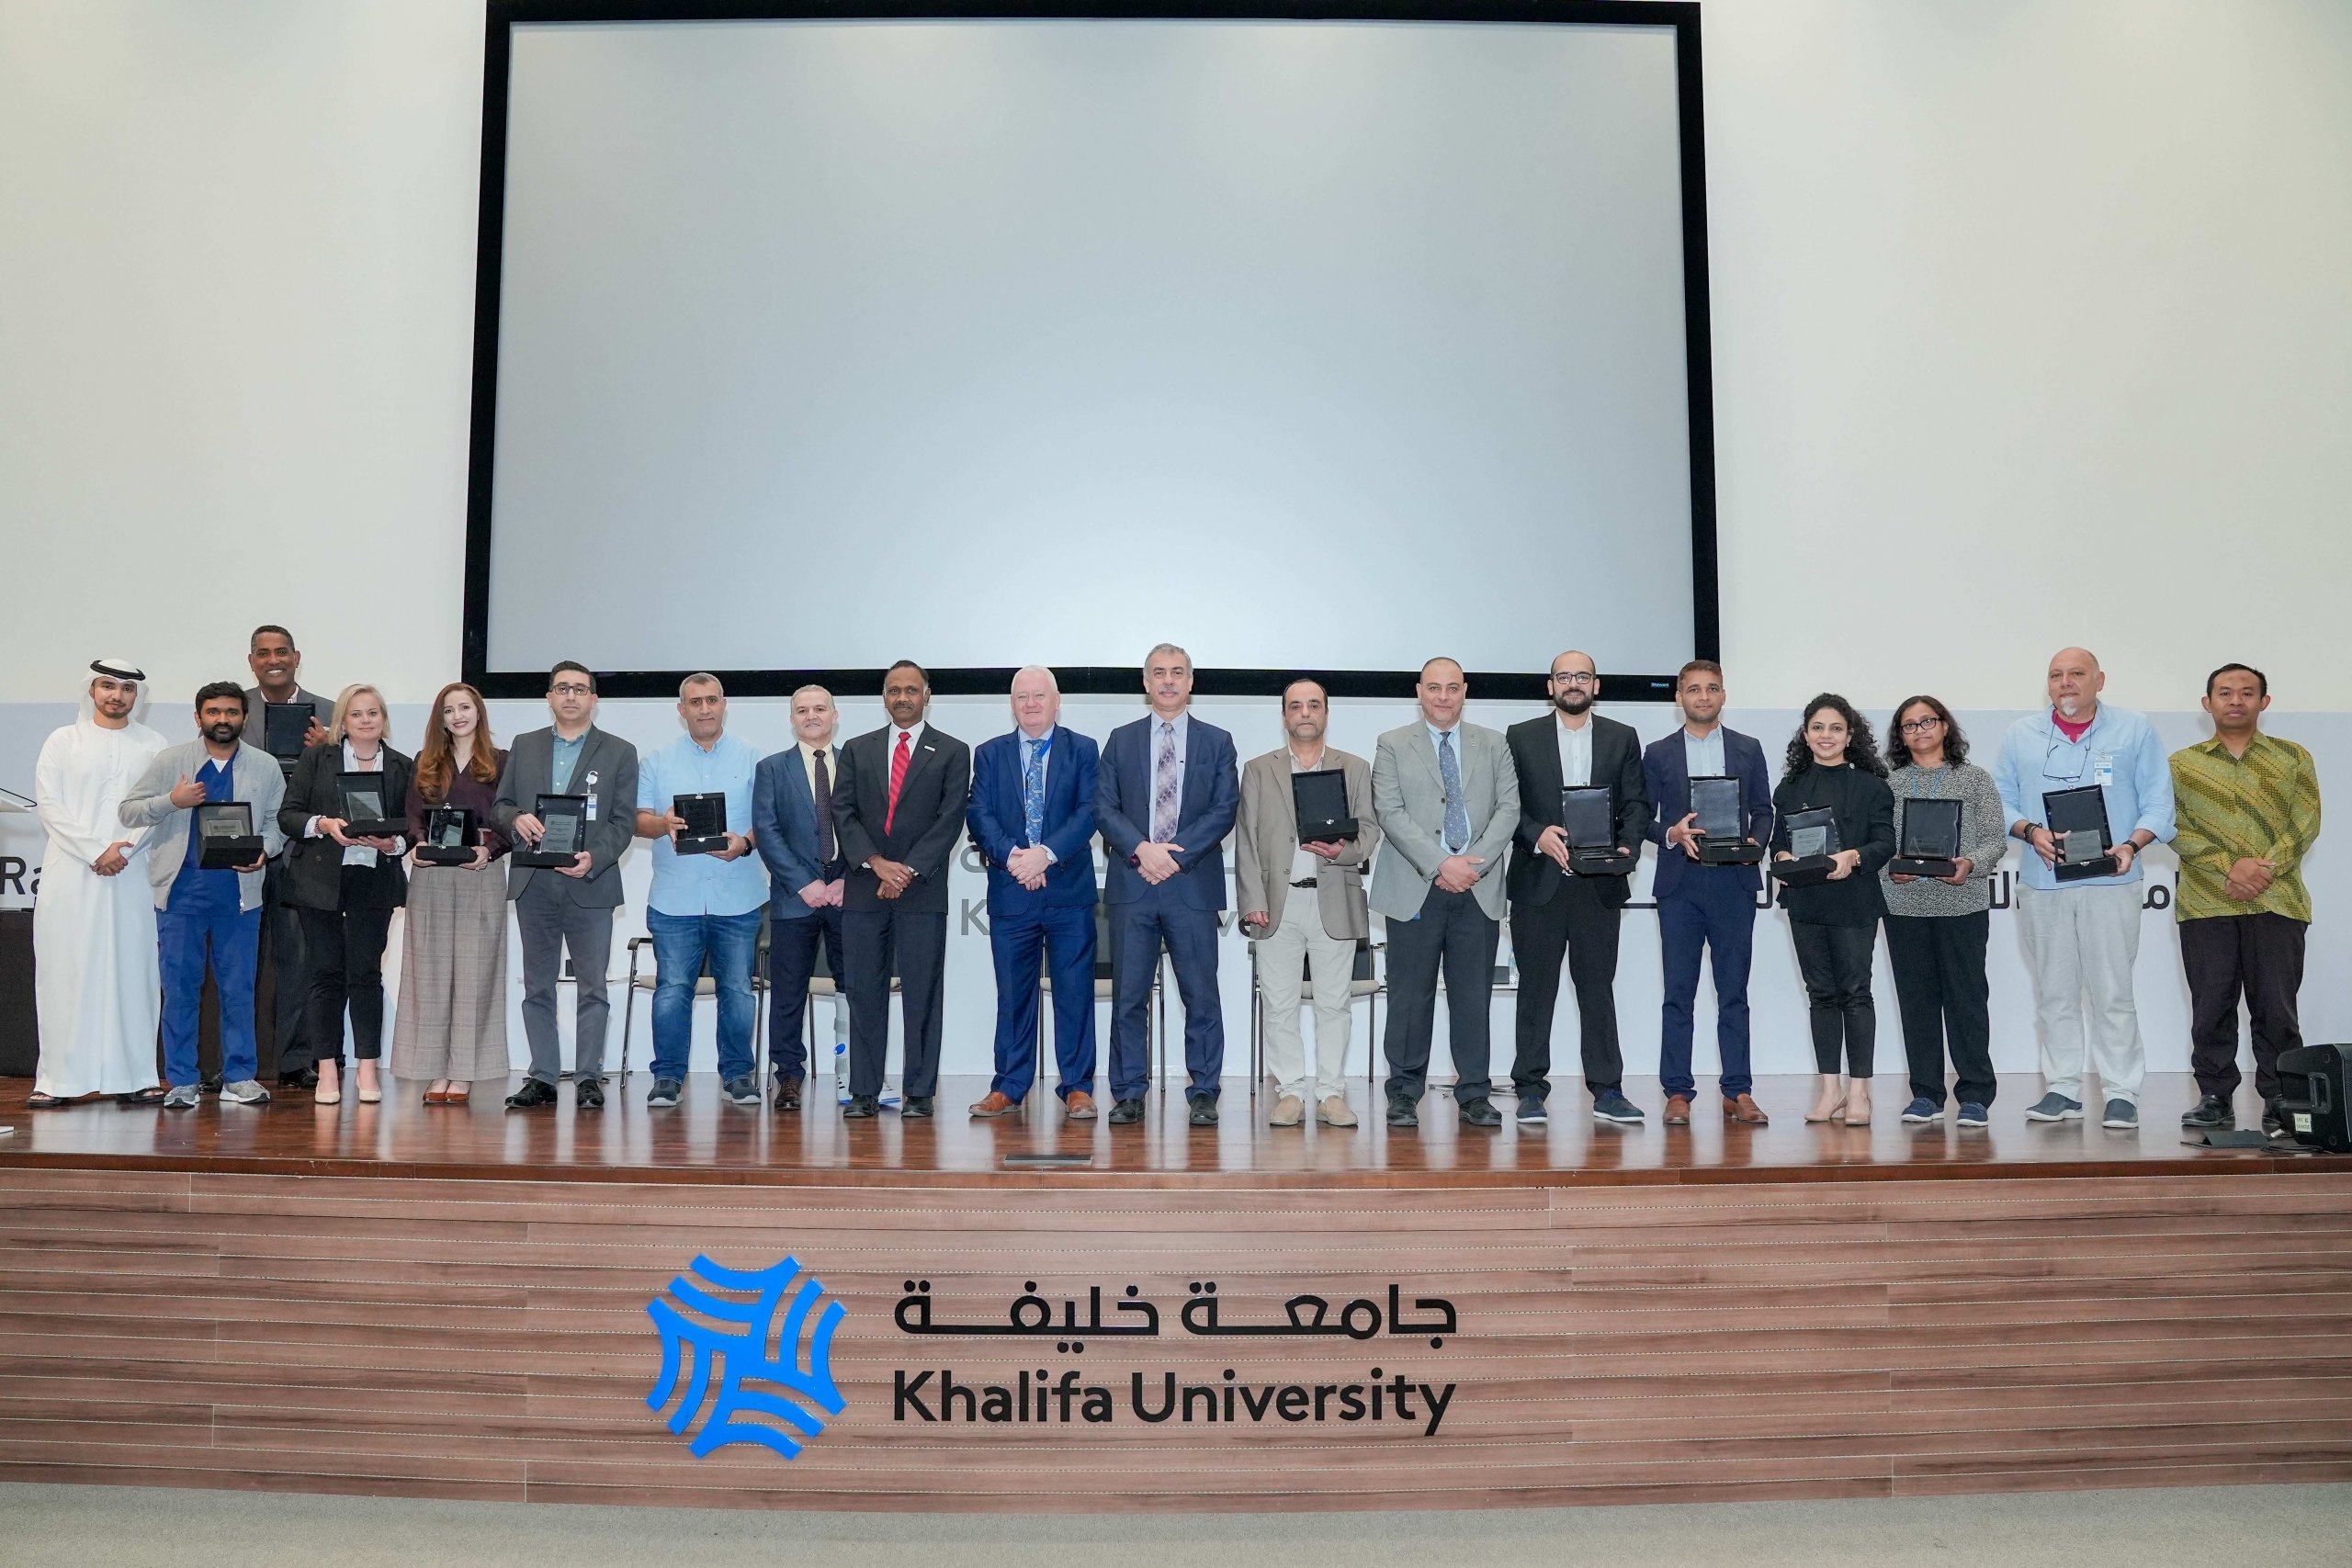 Khalifa University Provost Shares Updates and Awards Excellent Faculty and Staff